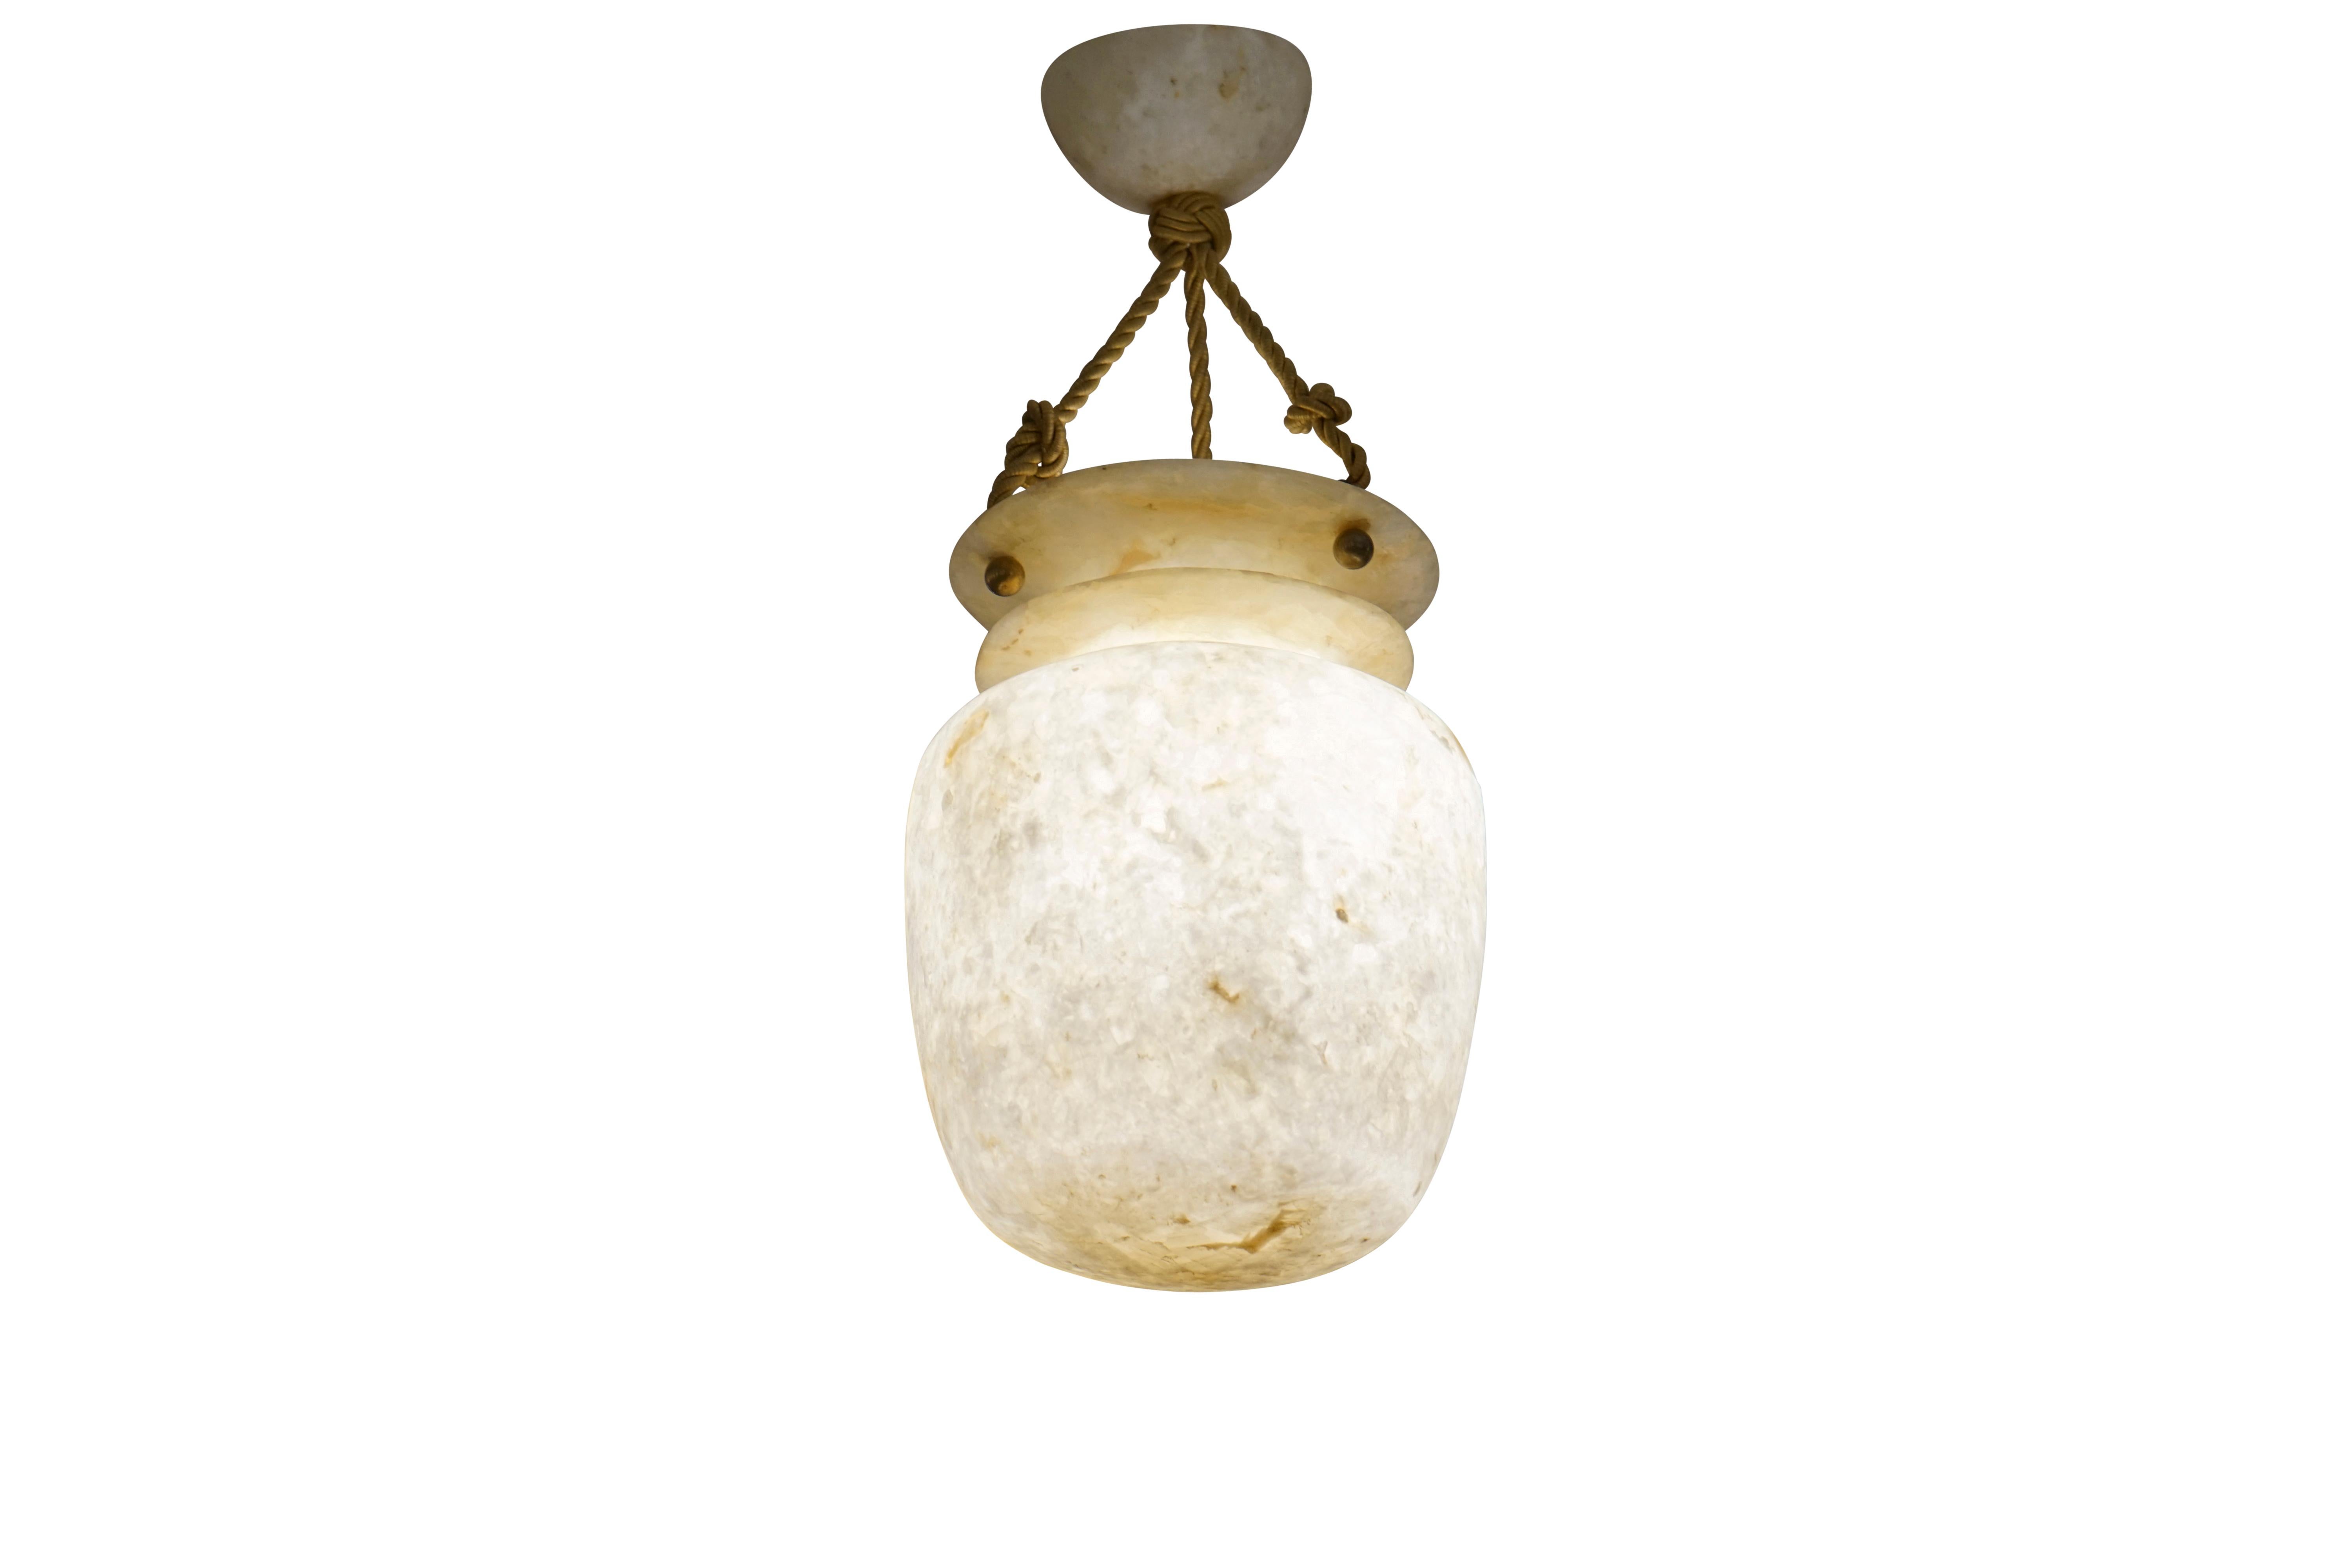 A petite fixture carved from a rare, unveined yet rustic type of alabaster, the fixture is a stylized Amphora with a single band encircling the 